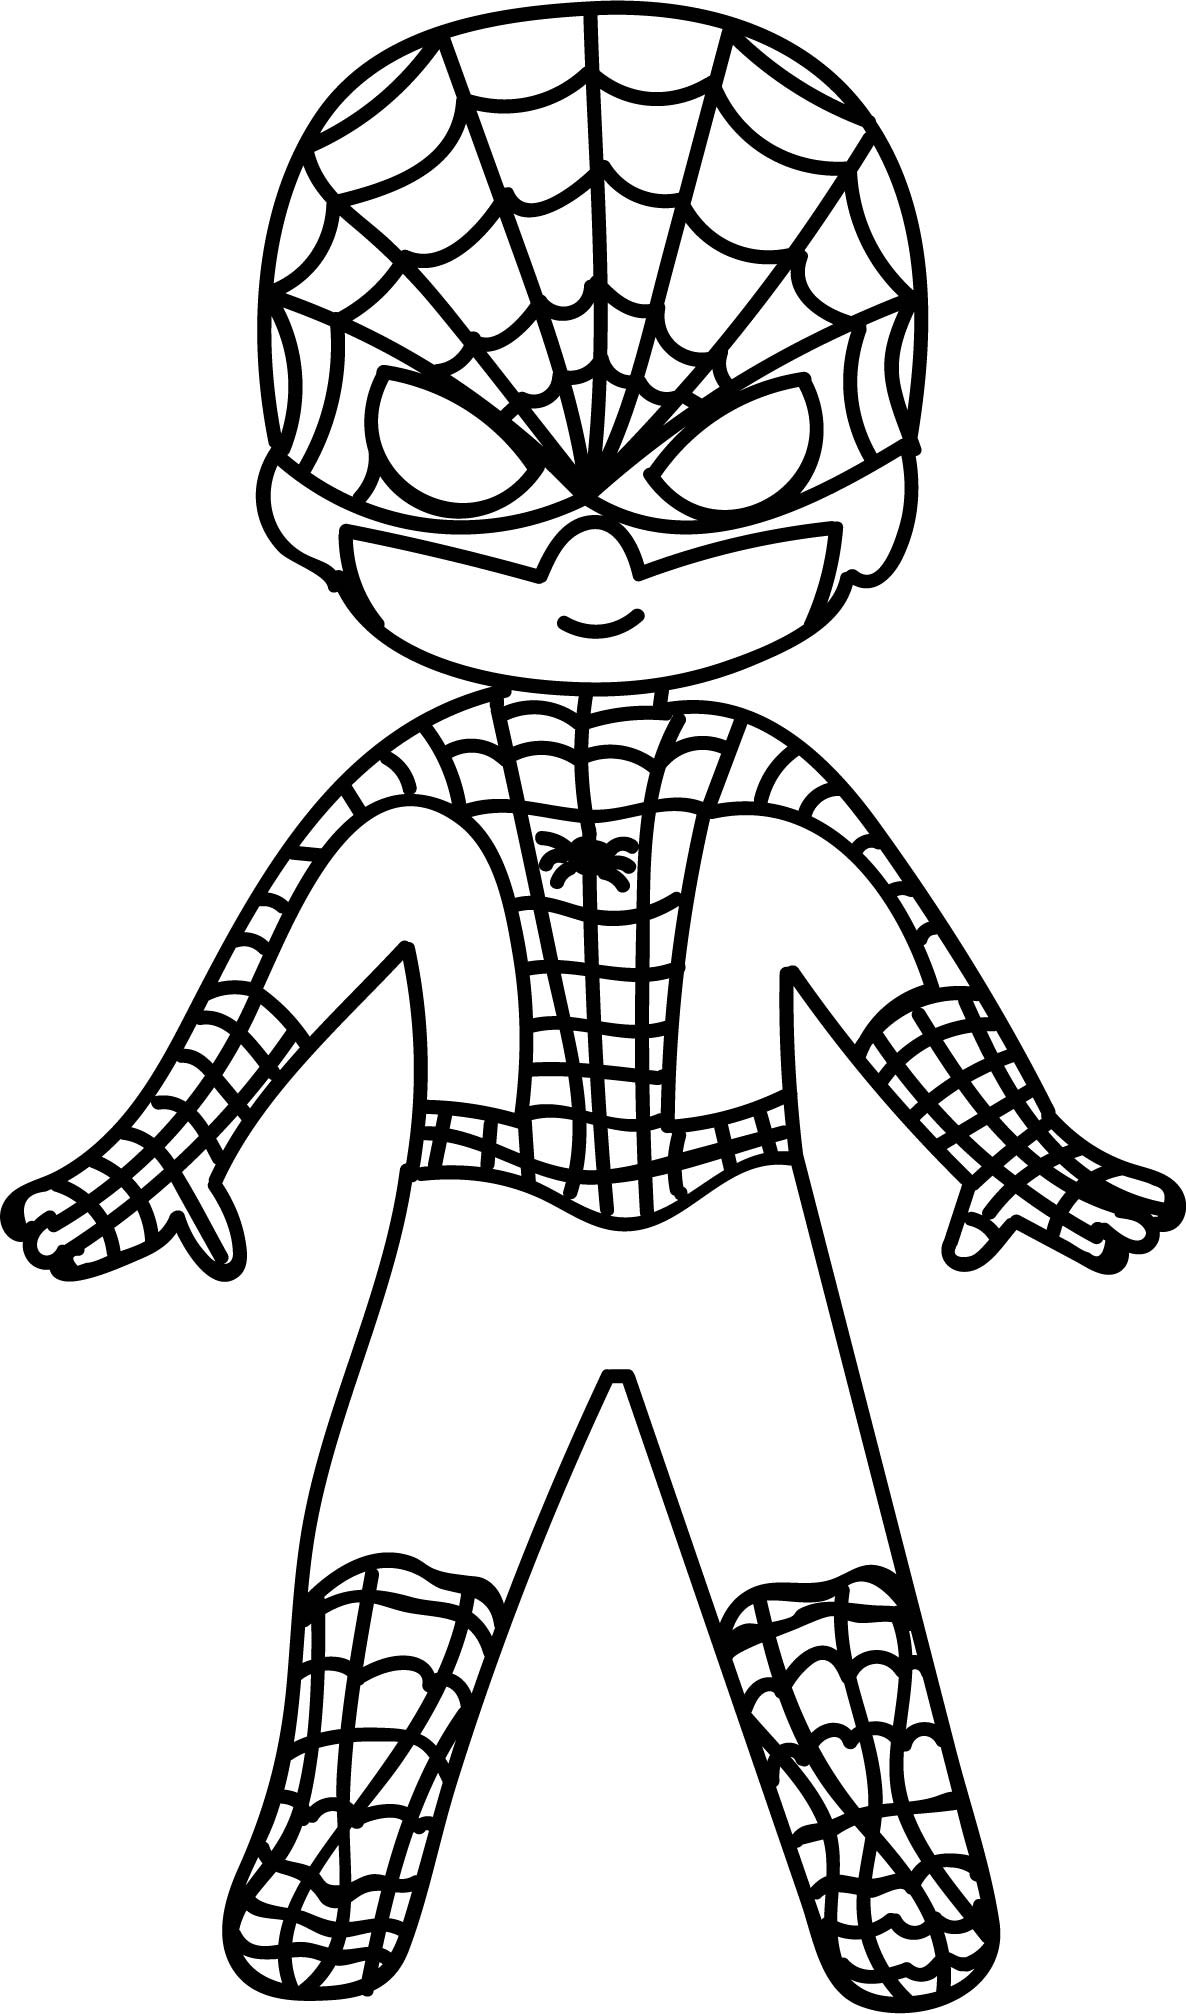 Spiderman Coloring Pages For Toddlers
 Spiderman Head Drawing at GetDrawings